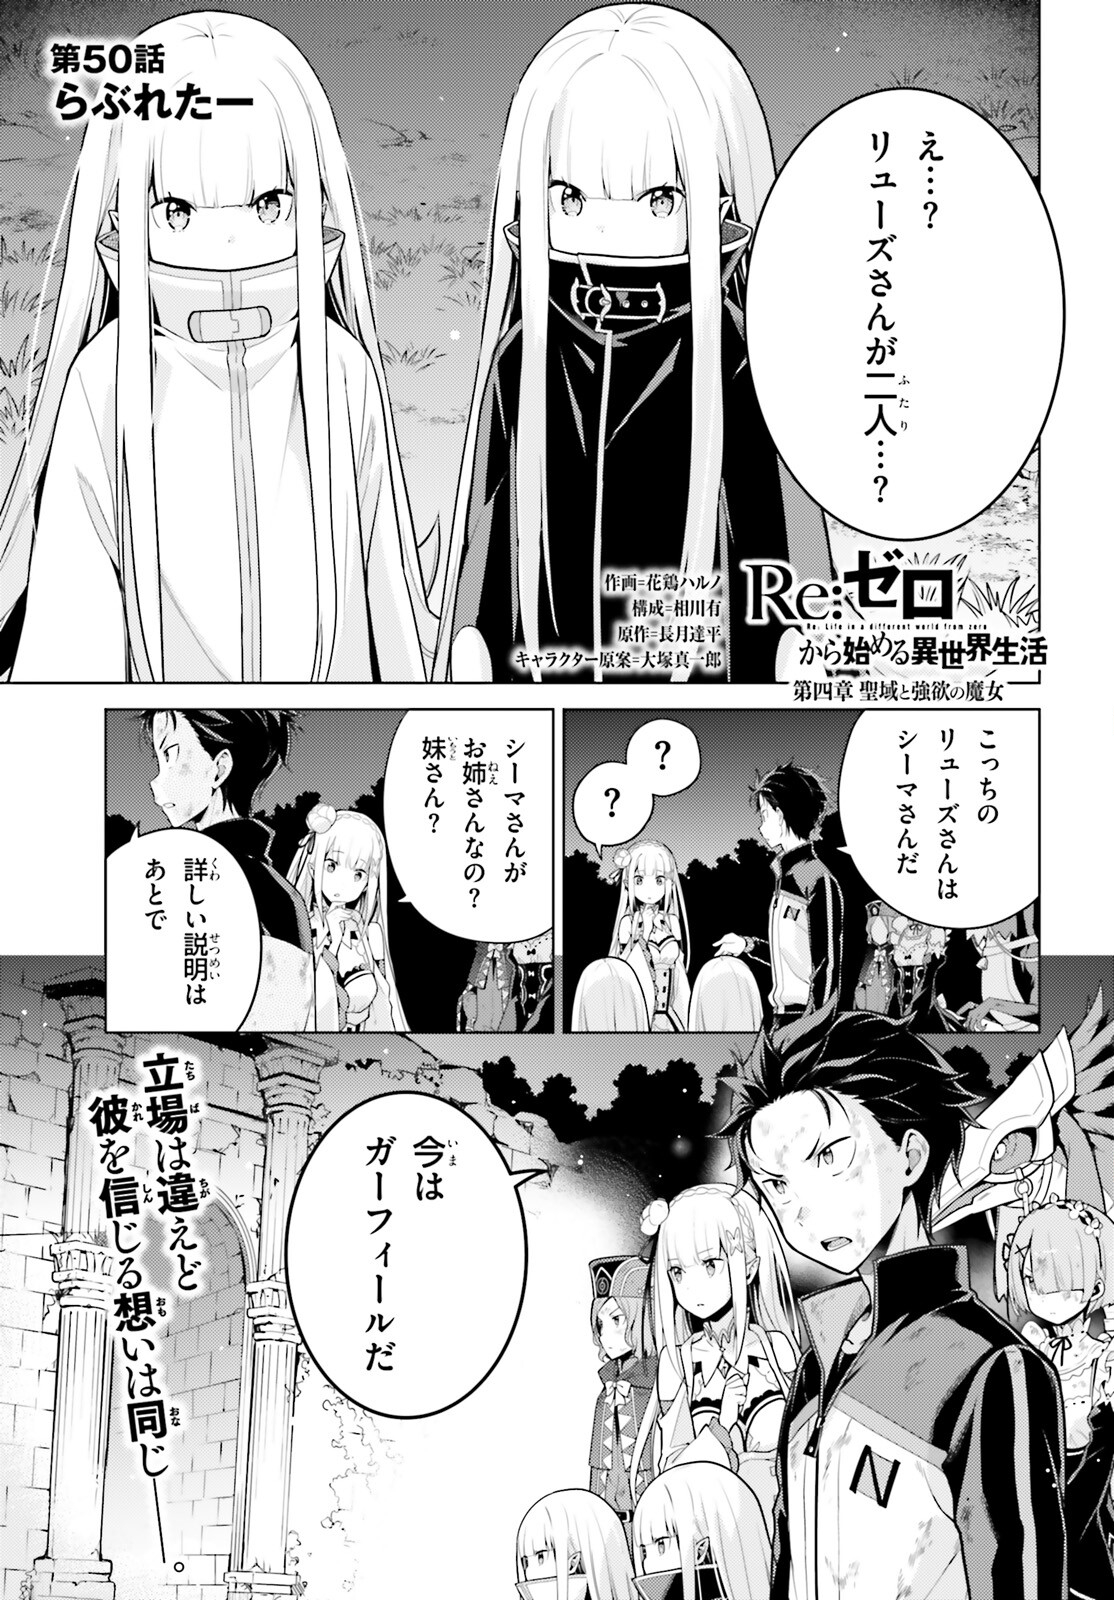 Reゼロから始める異世界生活 第四章 聖域と強欲の魔女 第50話 - Page 1